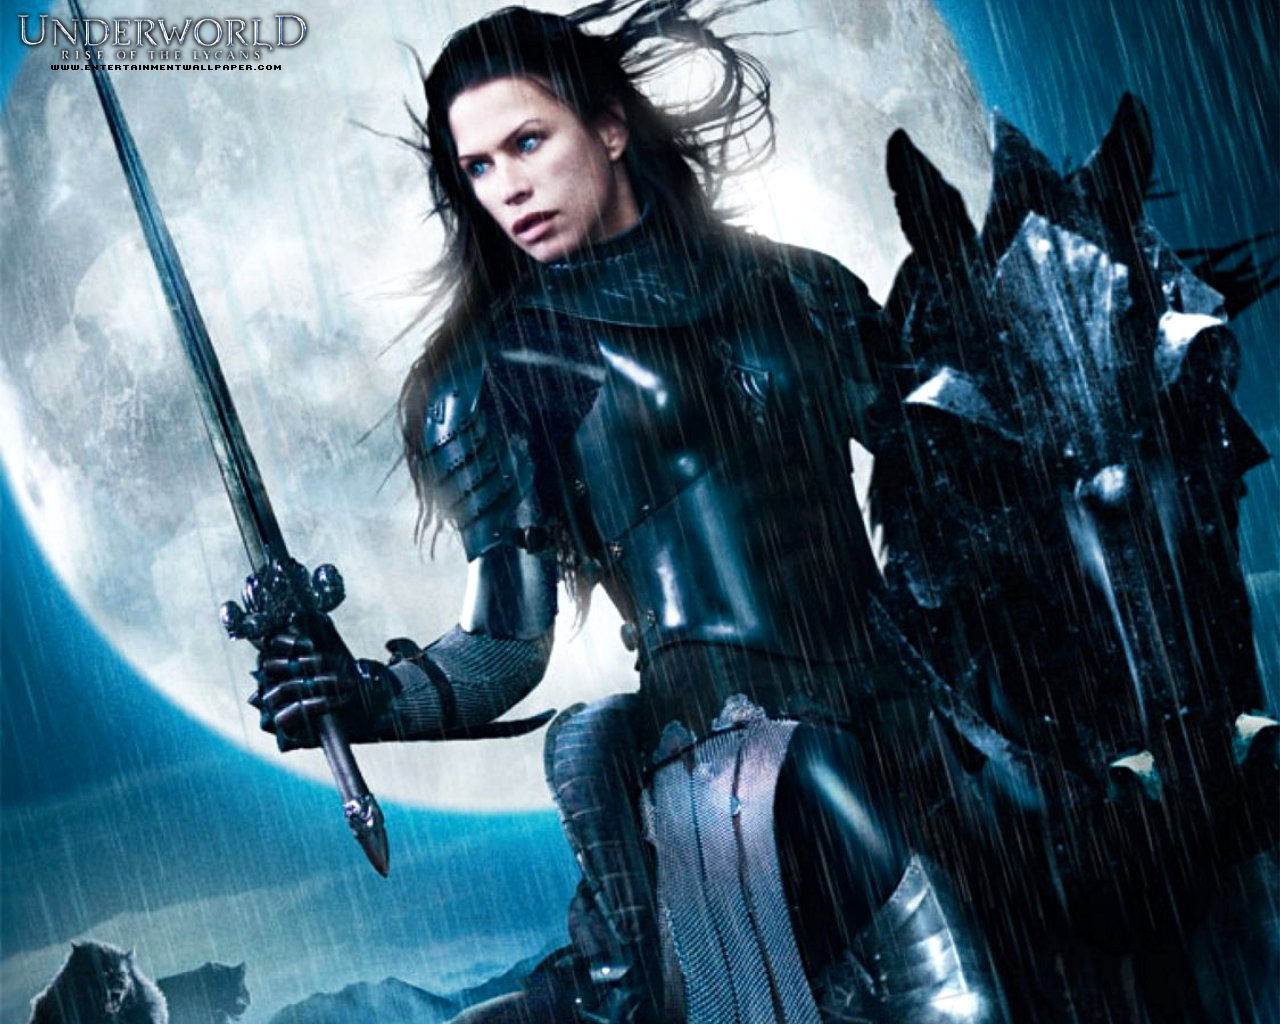 Underworld: Rise Of The Lycans Backgrounds, Compatible - PC, Mobile, Gadgets| 1280x1024 px